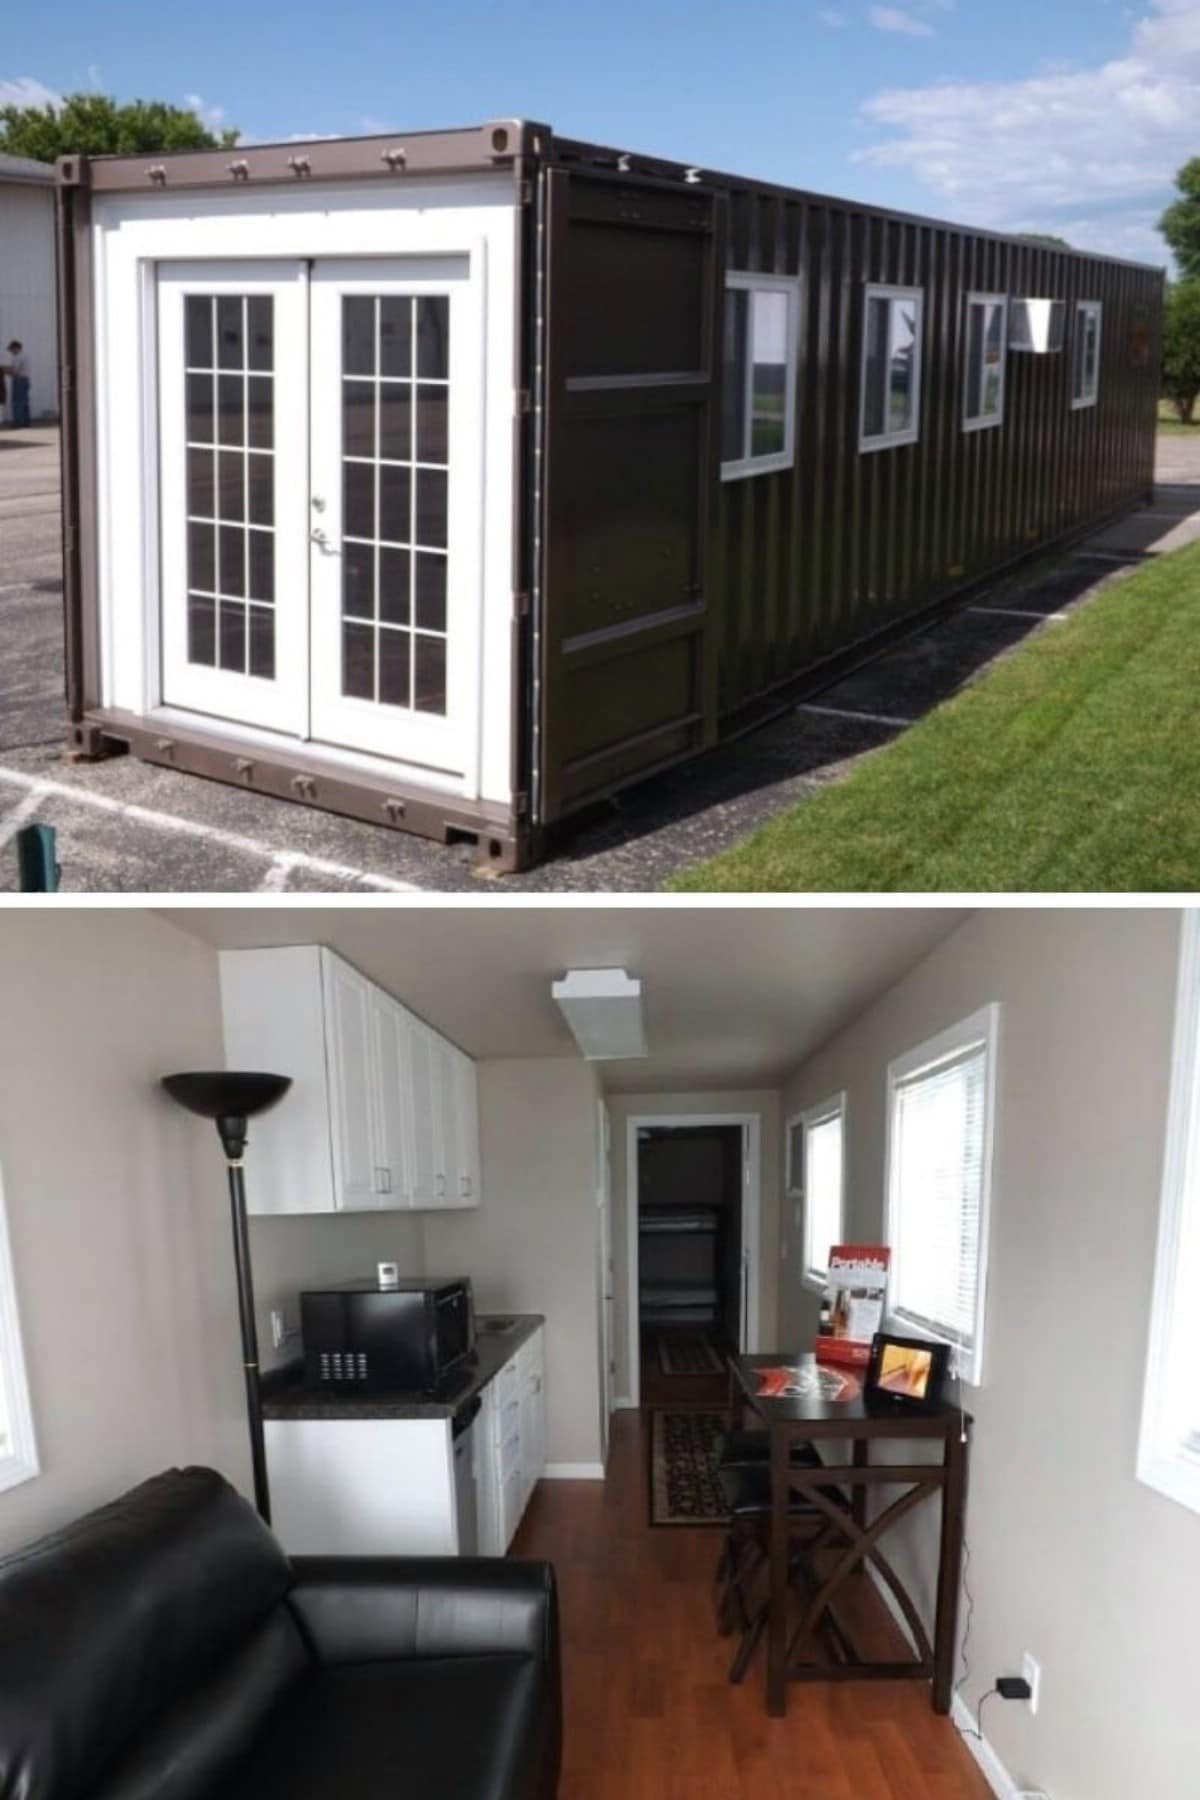 You Can Order This Shipping Container Home from Amazon